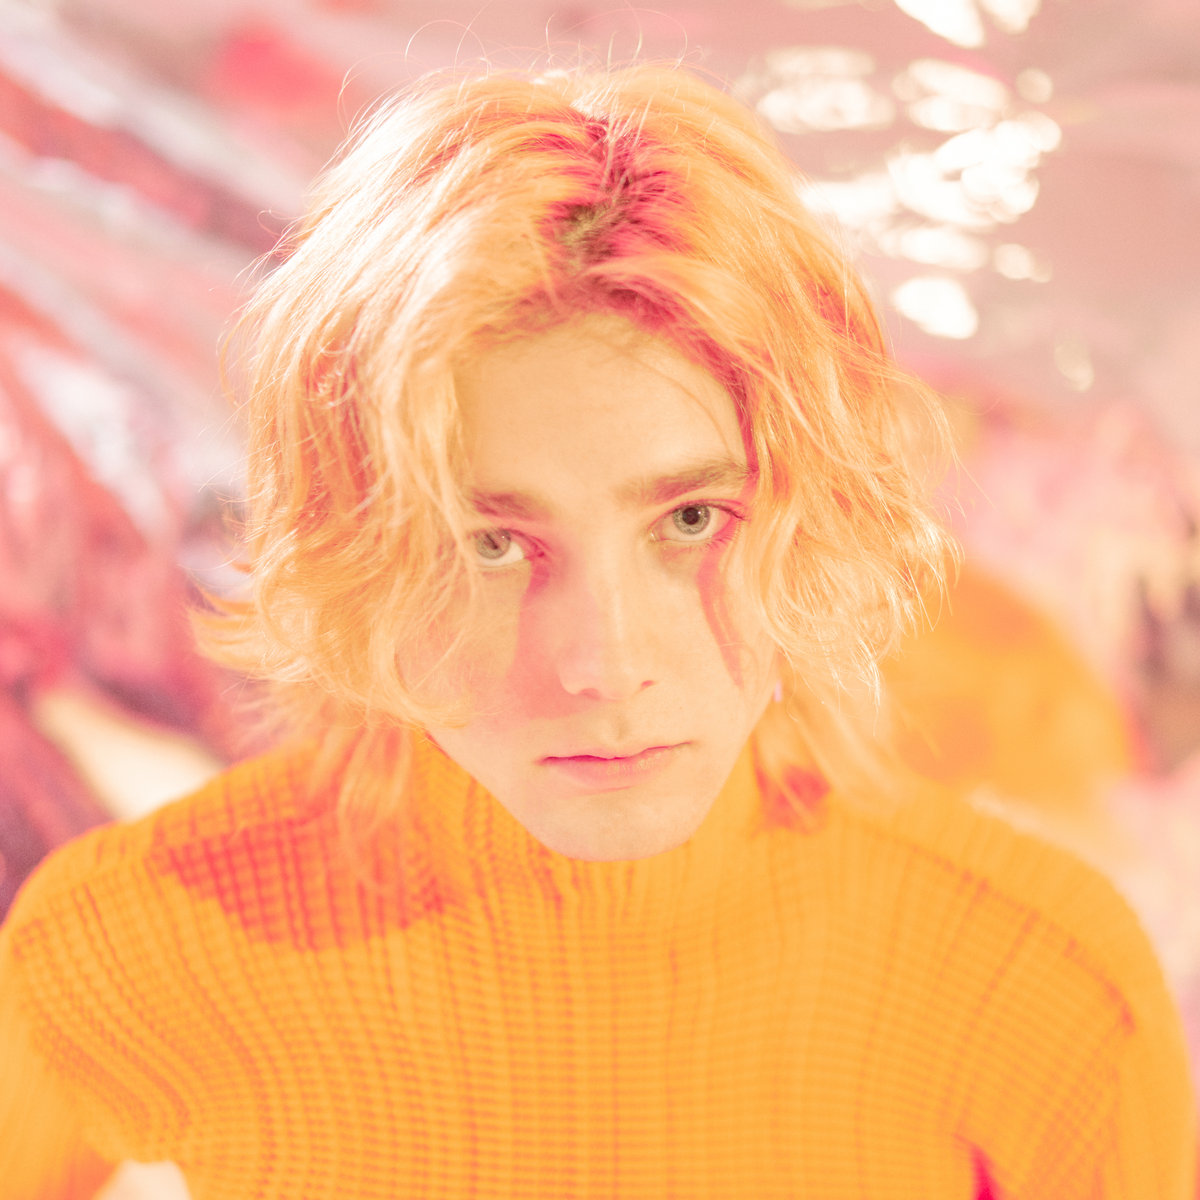 he album cover is a headshot of Instupendo. He’s wearing an orange fitted turtleneck and has blonde hair. Behind him is a pink and silver backdrop.